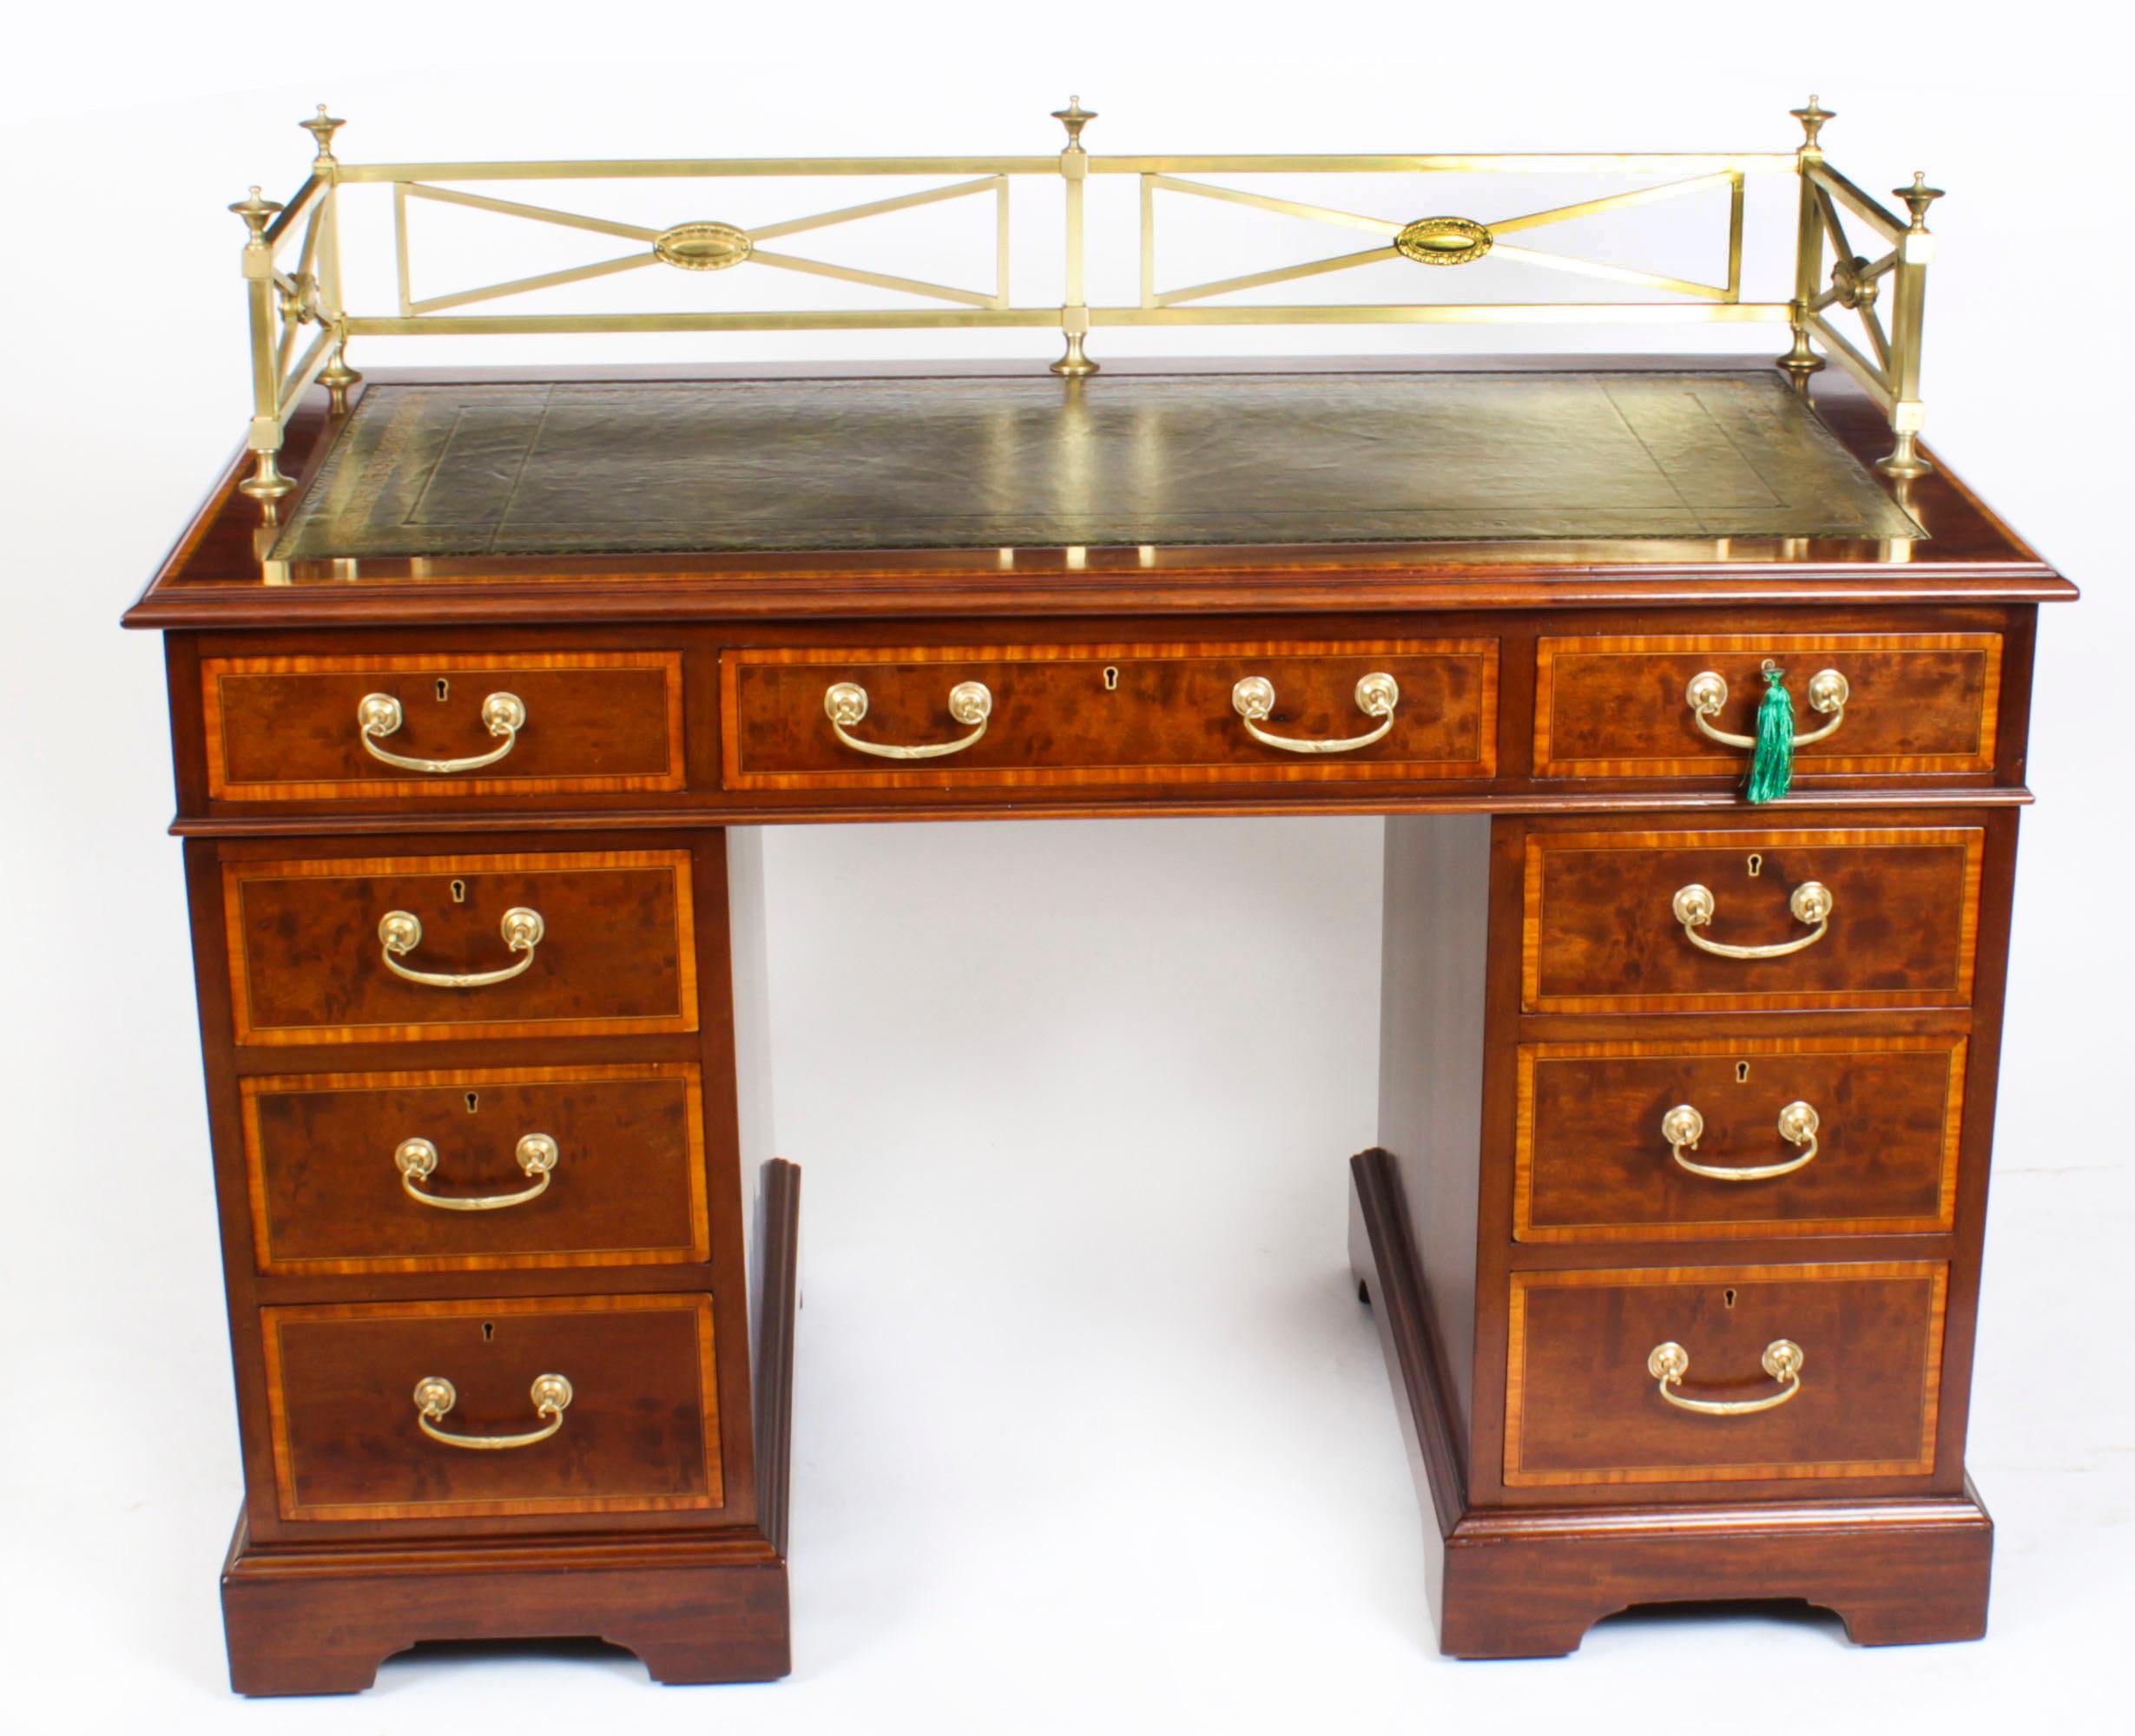 This is a superb antique Late Victorian Flame mahogany string inlaid and satinwood crossbanded pedestal kneehole desk, circa 1880 in date.
 
It is made from fabulous flame mahogany, the rectangular top with an inset olive green gold tooled leather